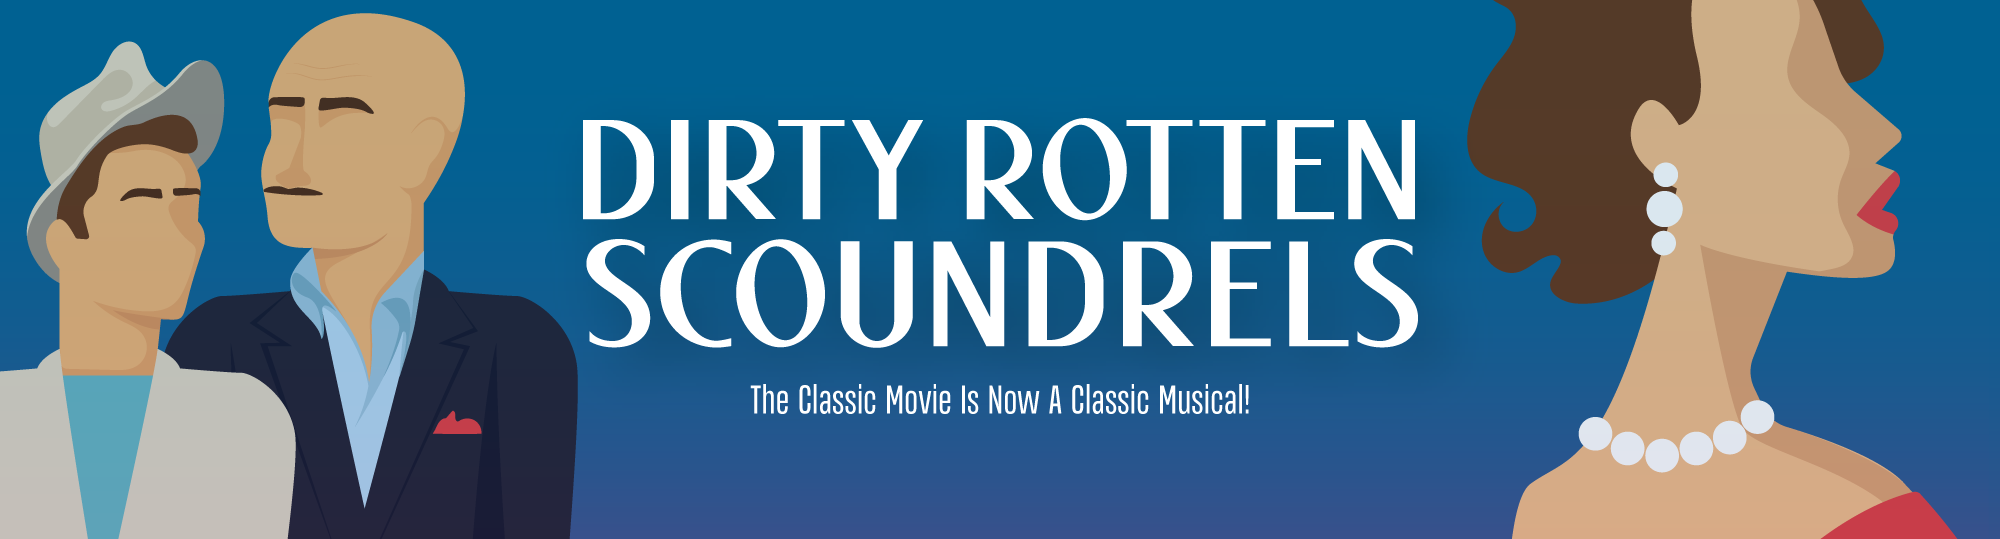 Dirty Rotten Scoundrels banner image